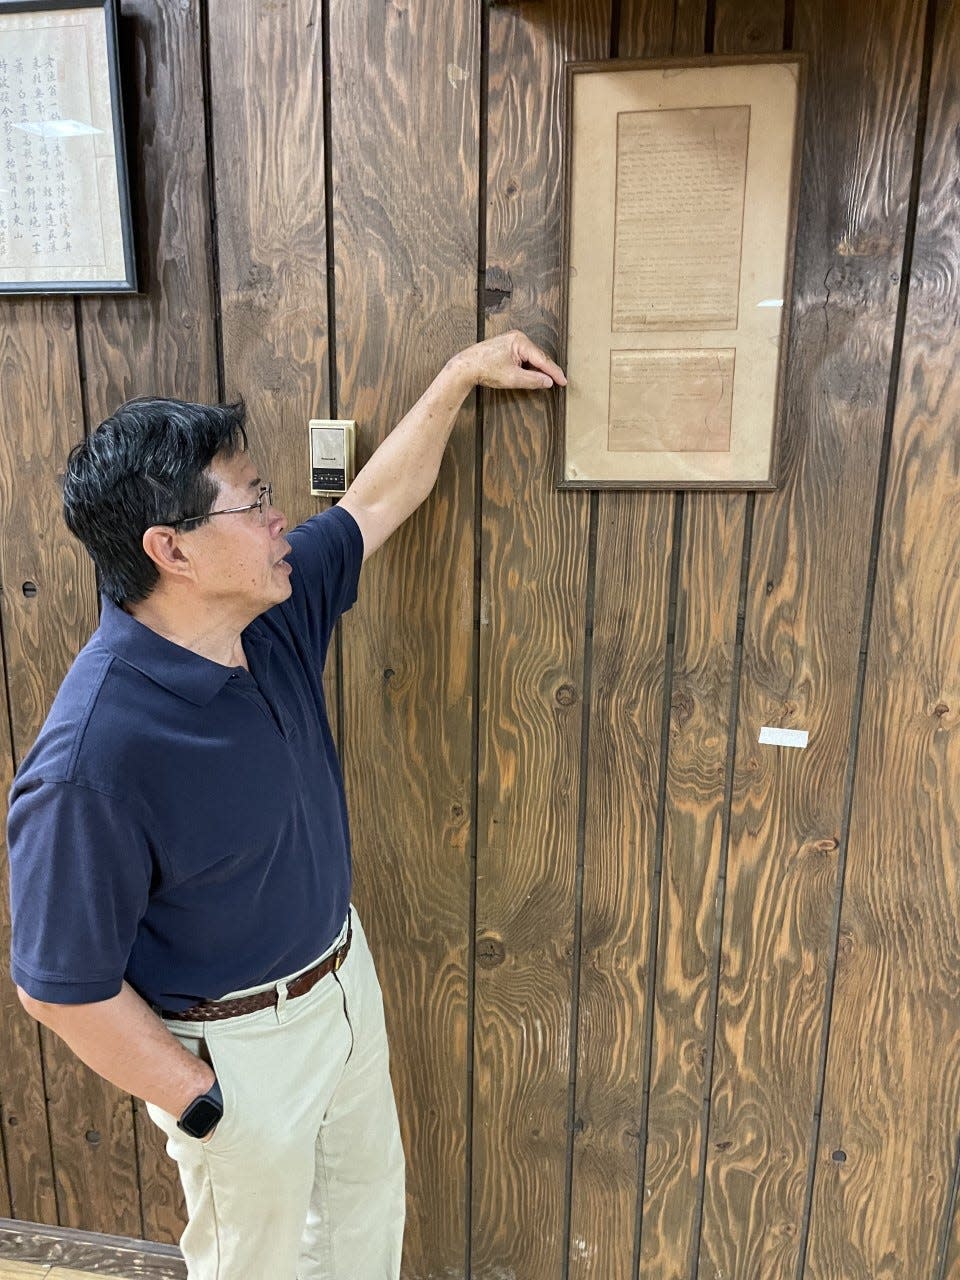 Gary Tom, president of Augusta's Chinese Consolidated Benevolent Association, points out the group's original 1927 petition founding the CCBA, at the group's downtown headquarters on Walker Street.